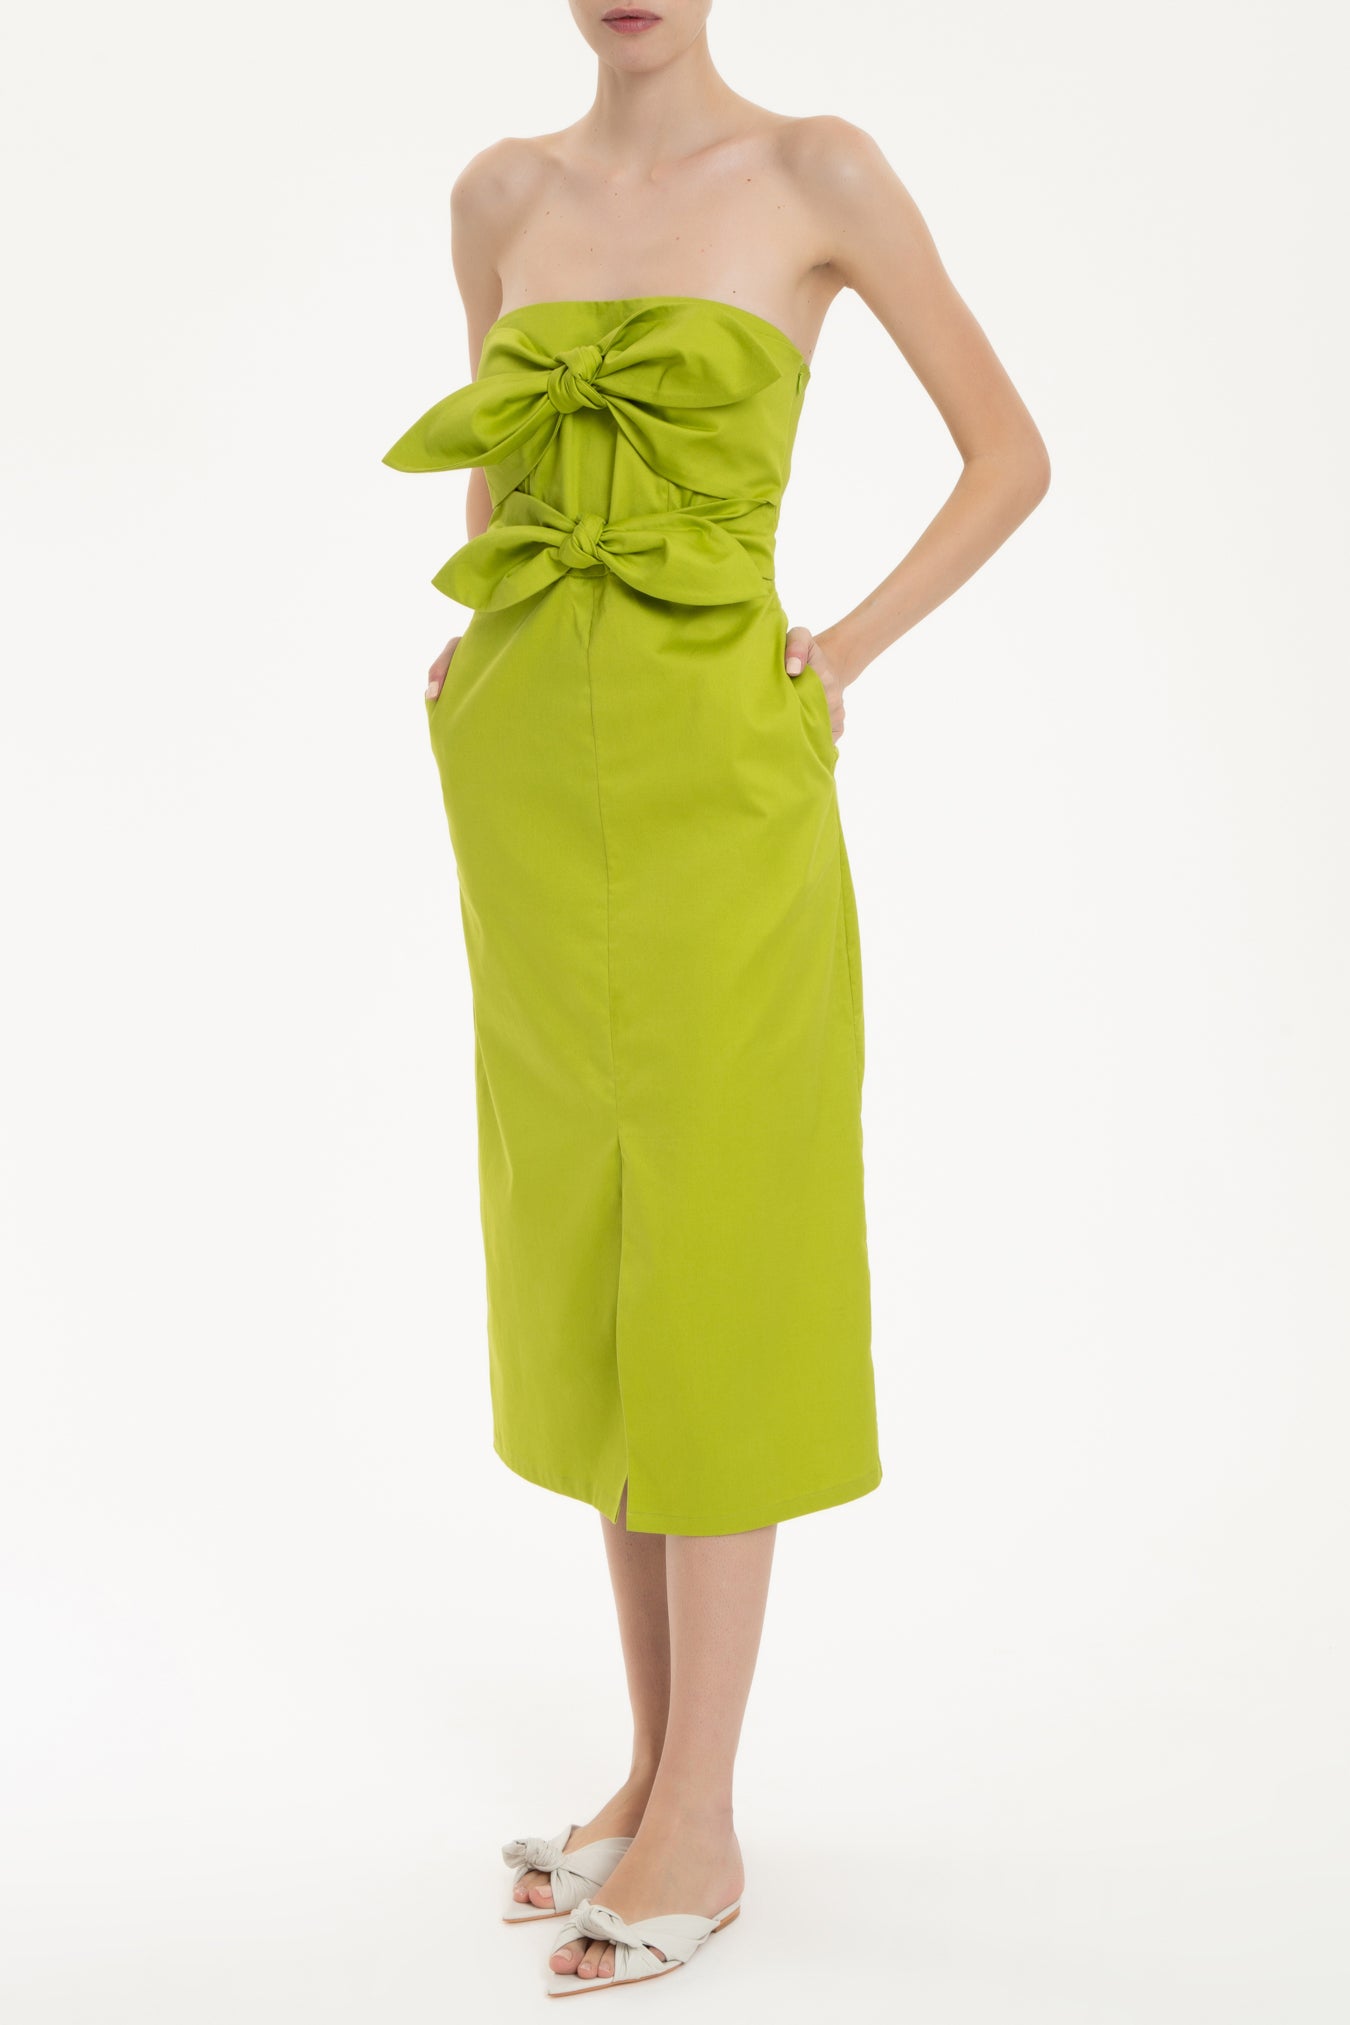 Solid Green Strapless Midi Dress With Double Knot Front 2